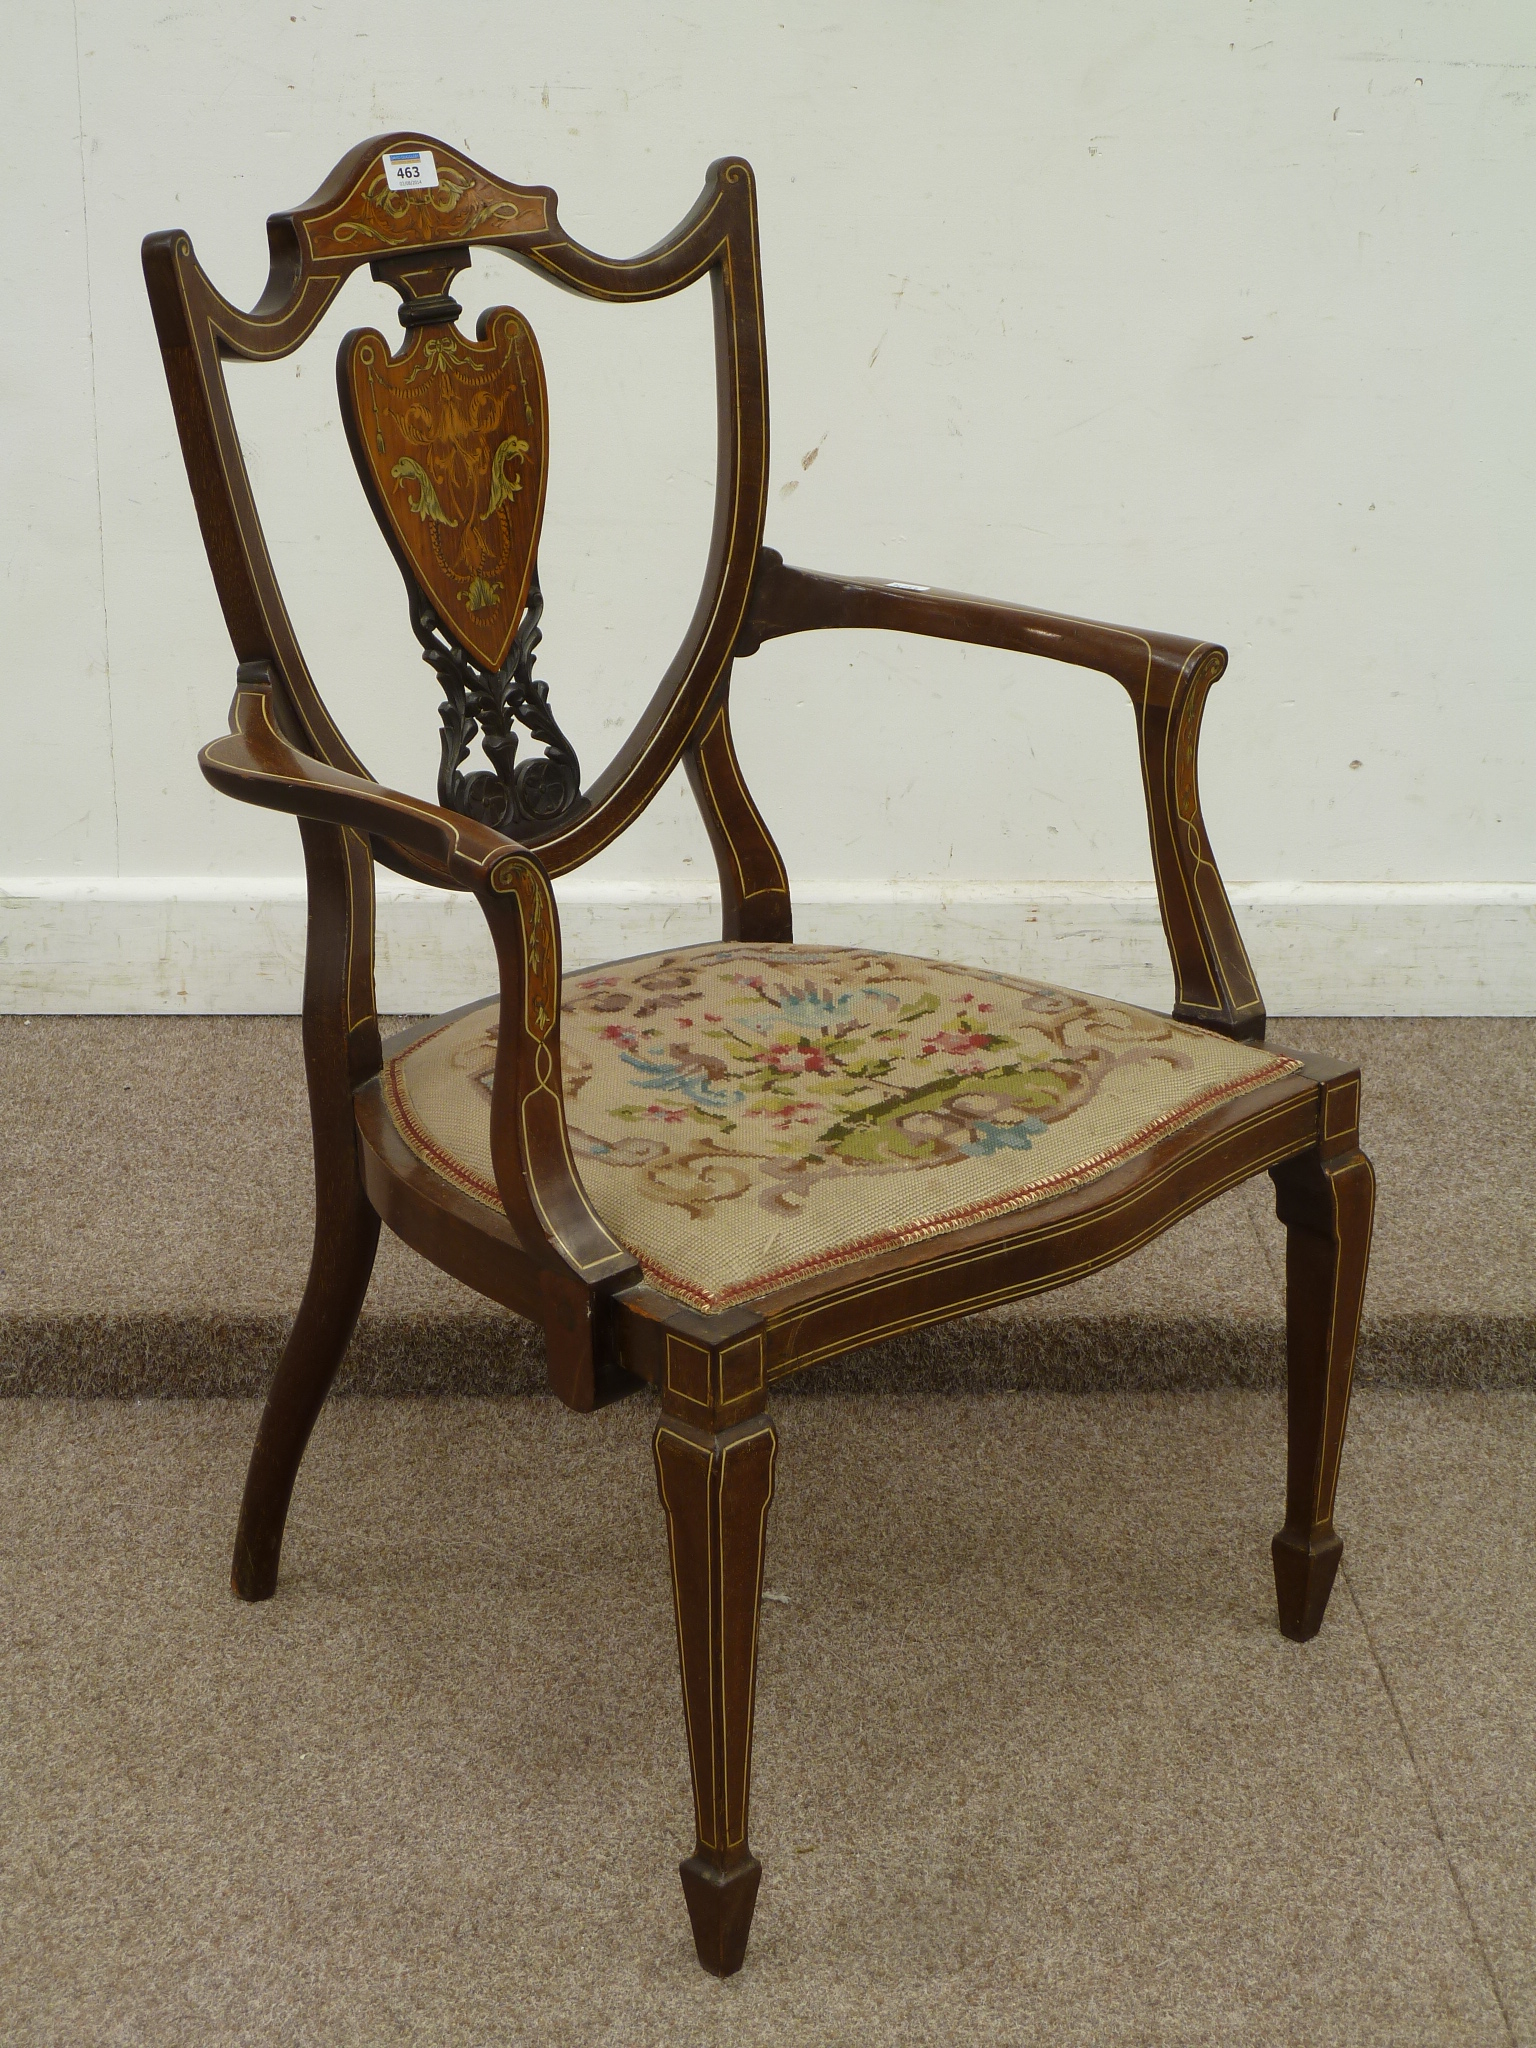 Edwardian inlaid rosewood salon chair, tapestry seat